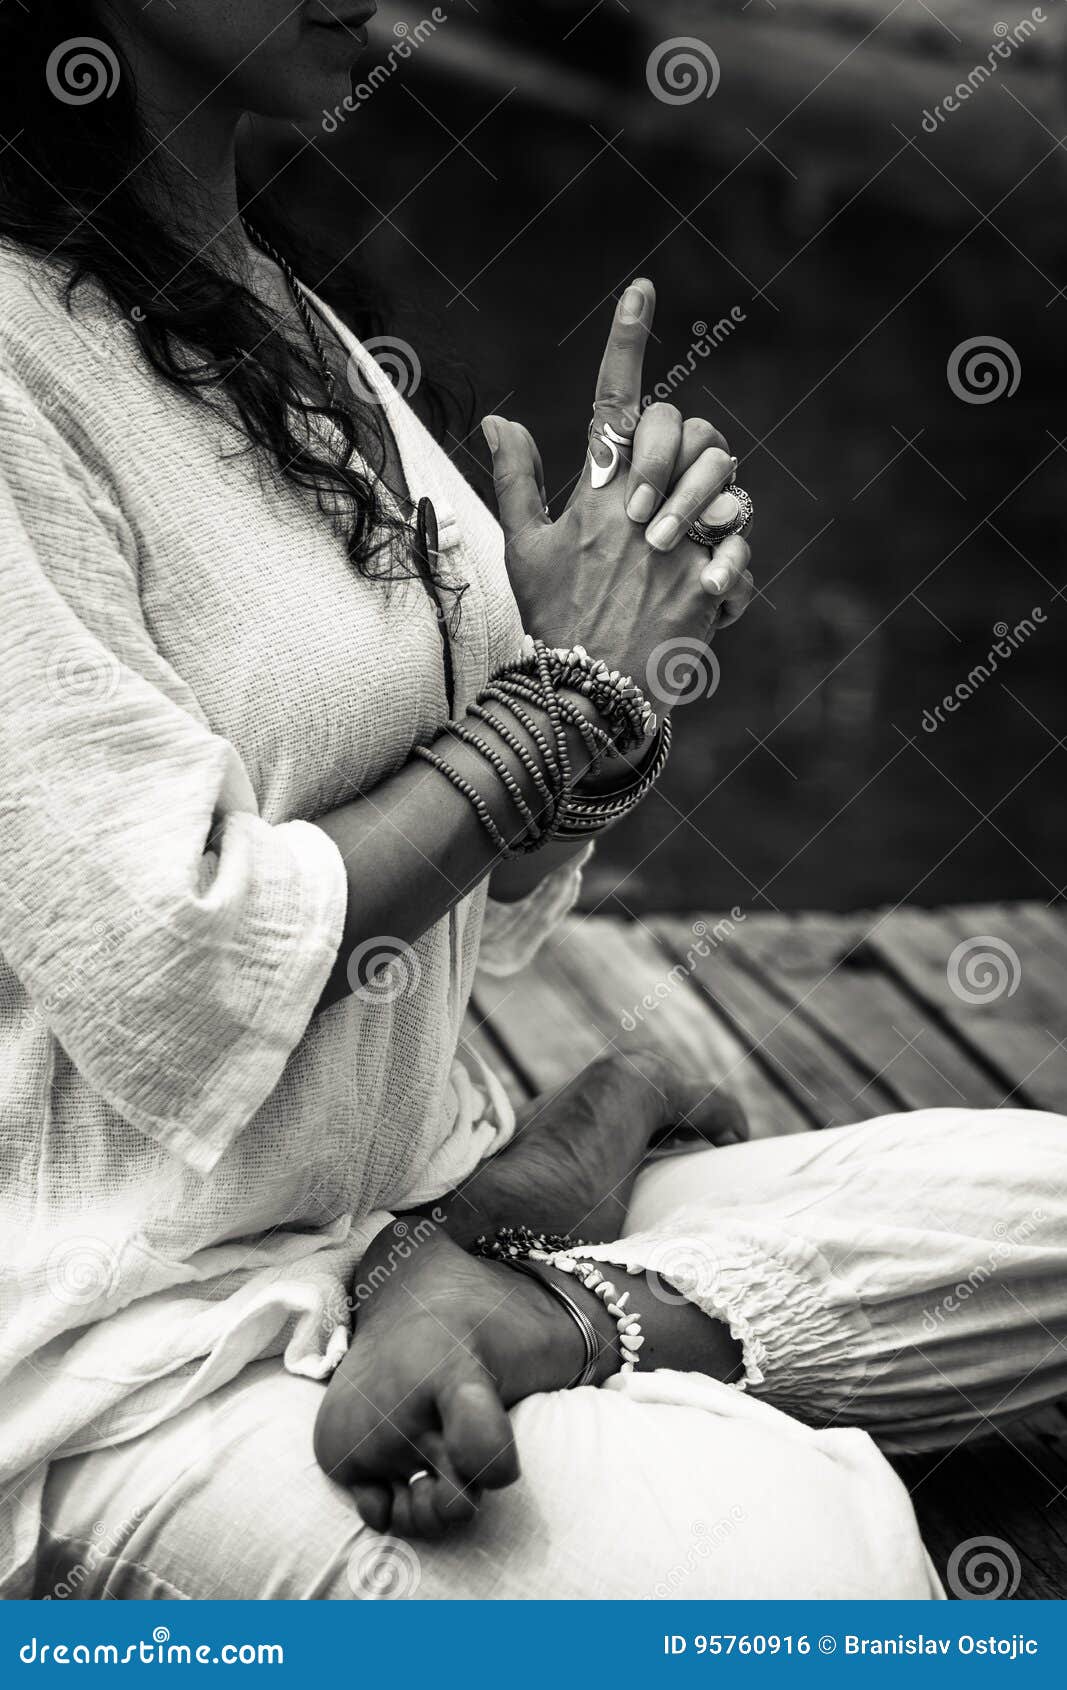 woman hands in yoga ic gesture mudra bw outdoor